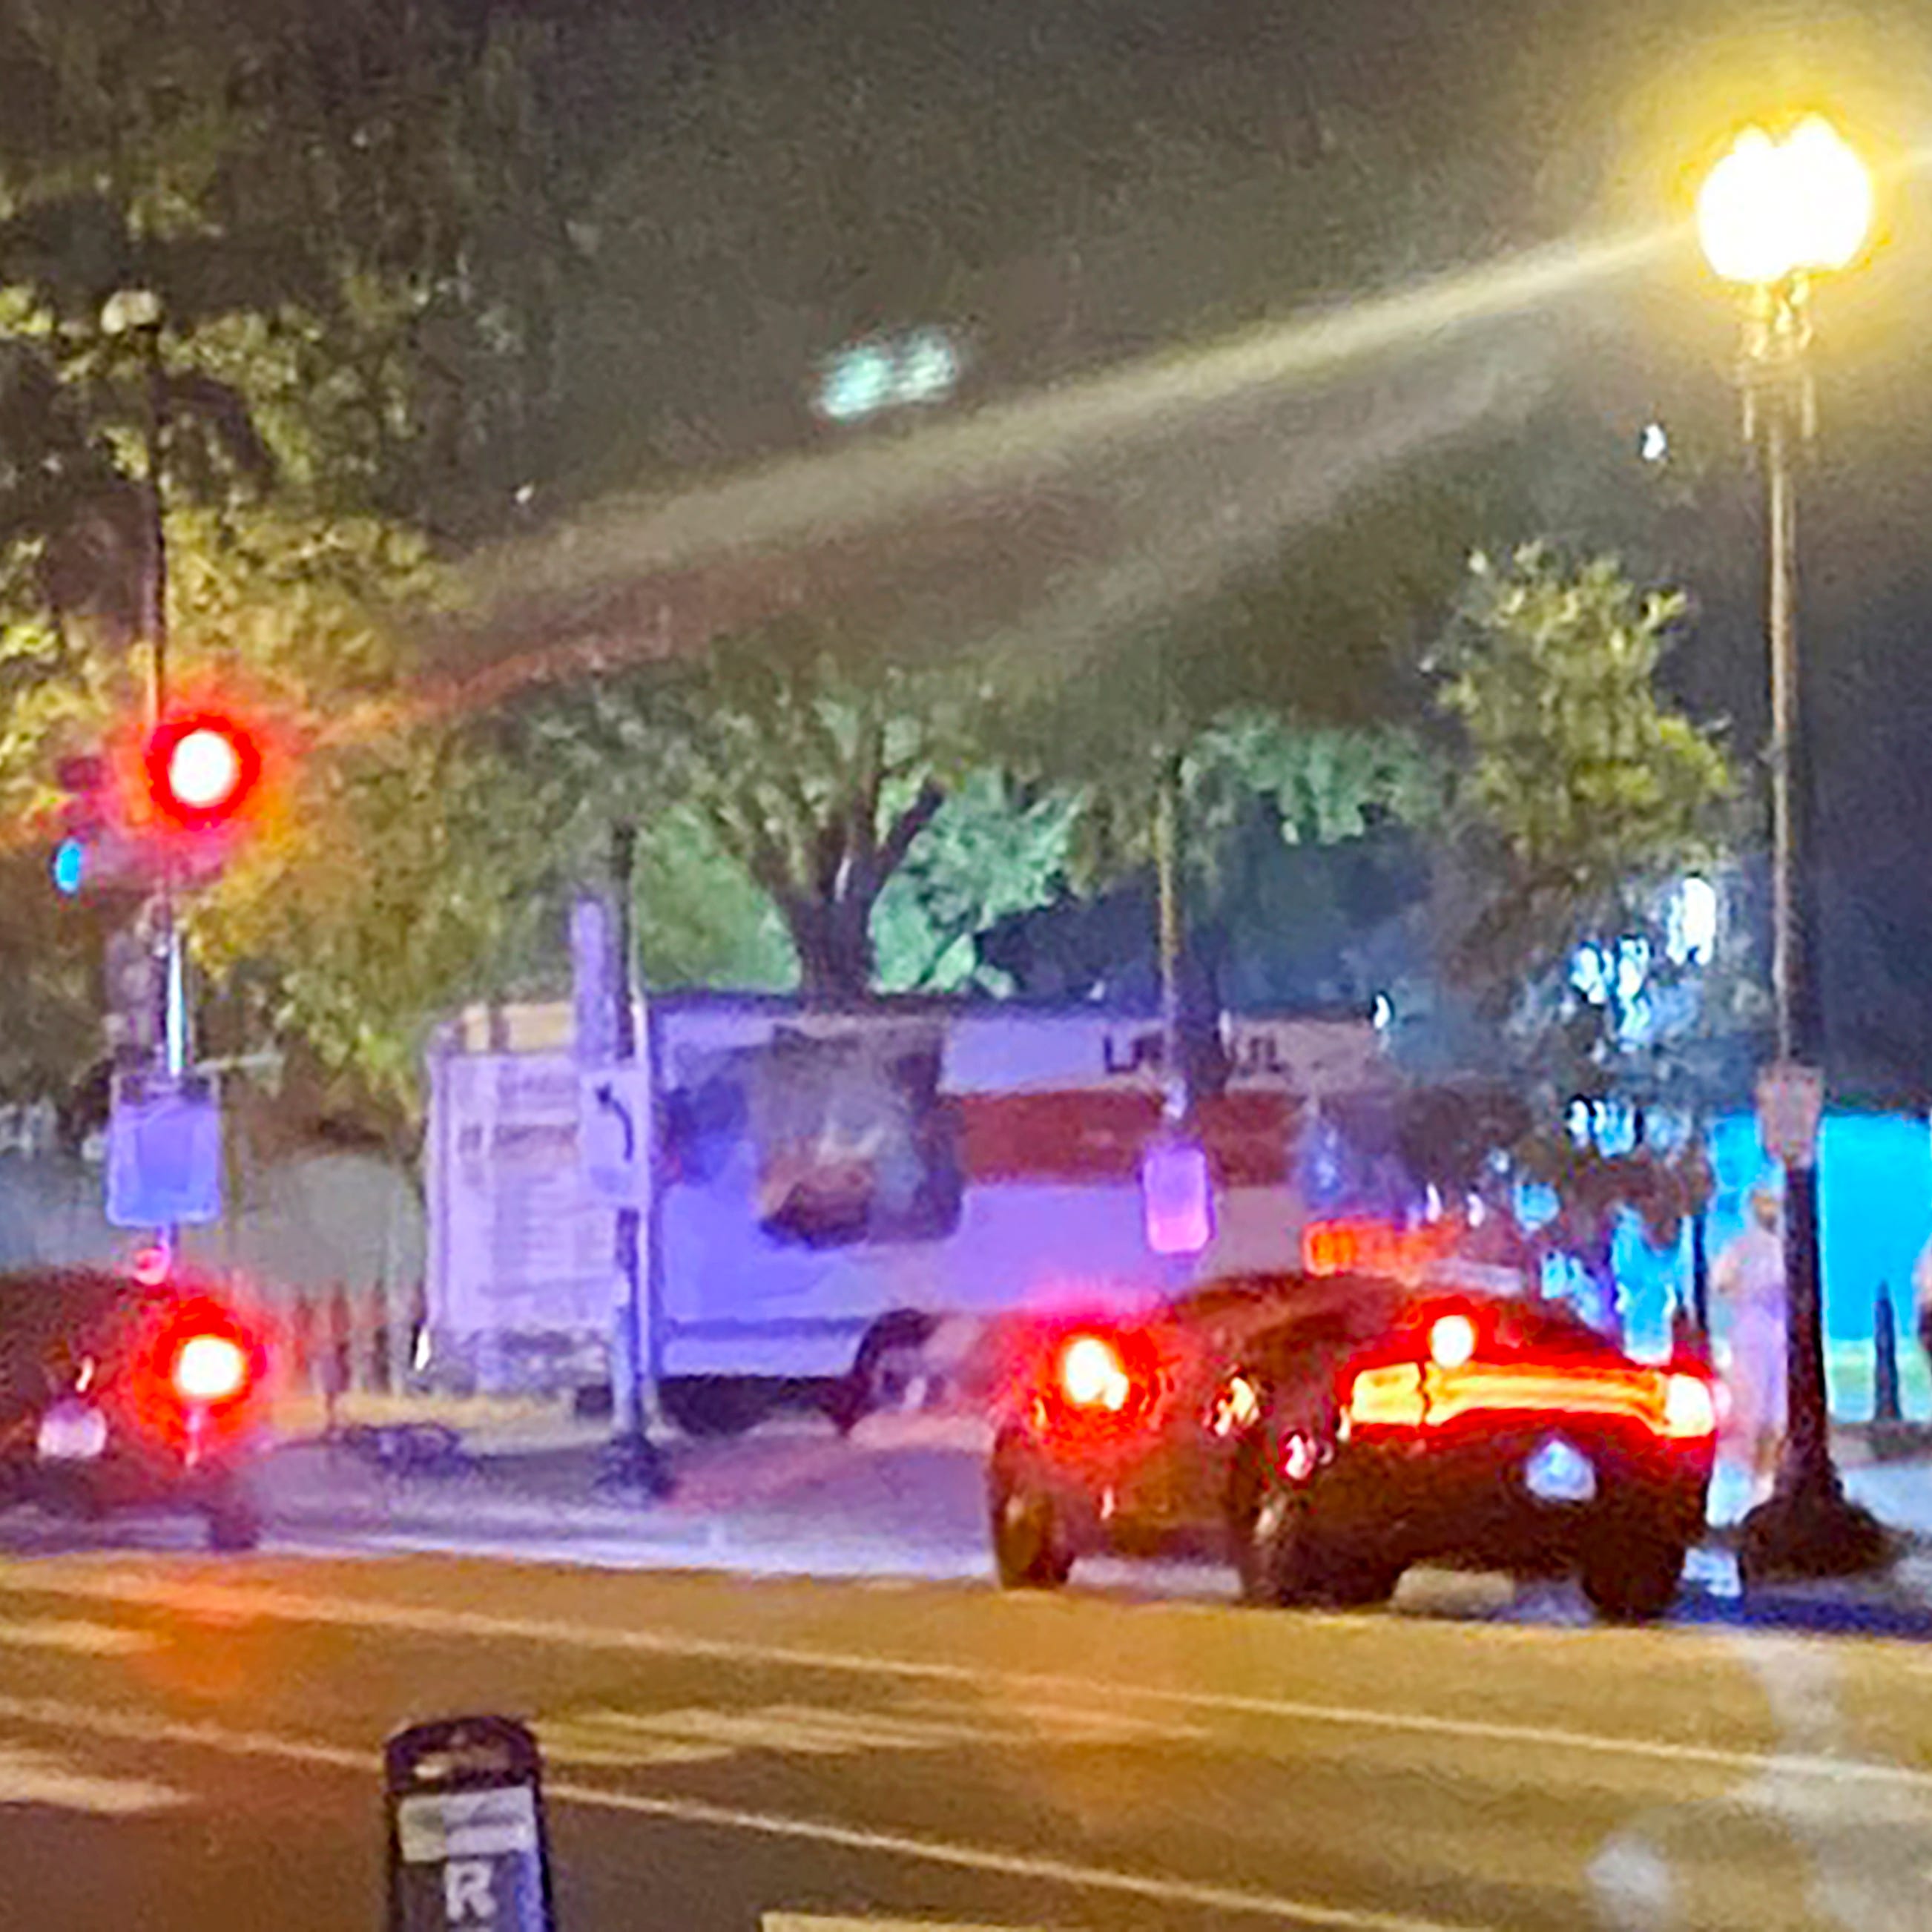 A box truck is seen crashed into a security barrier at a park across from the White House, Monday night, May 22, 2023 in Washington. Police have arrested a man they believe intentionally crashed a U-Haul truck into a security barrier near the north side of Lafayette Square late Monday night. No one was injured.